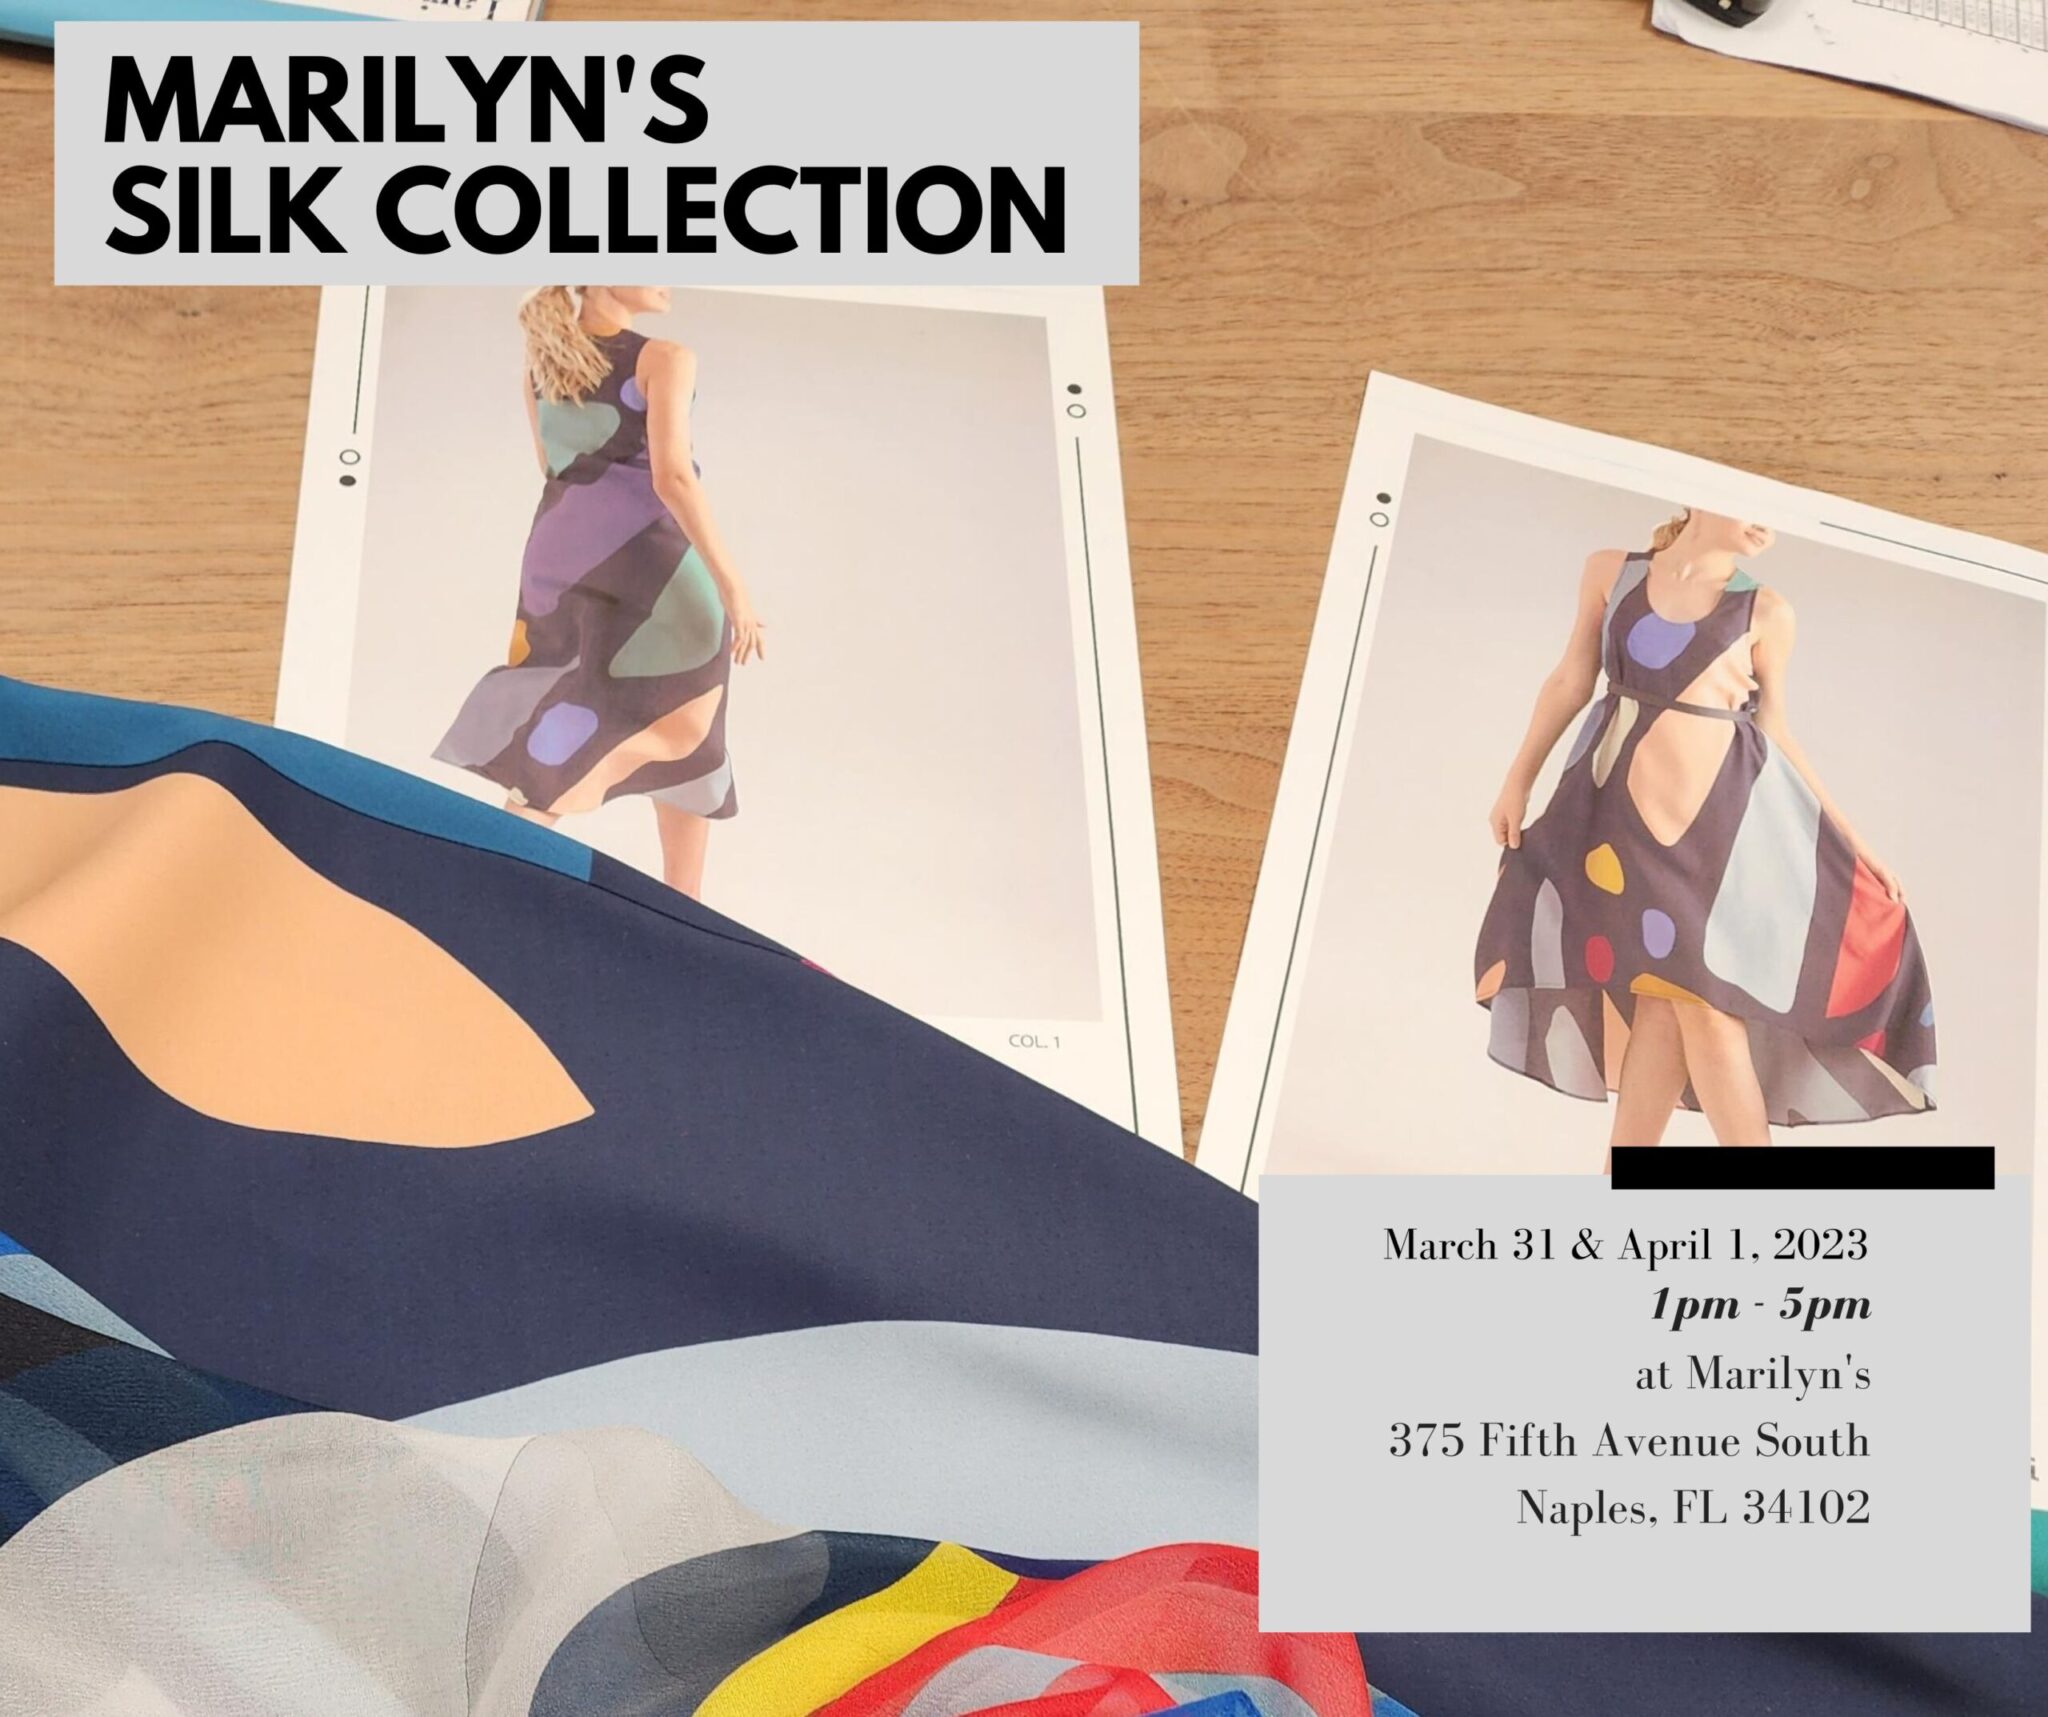 Marilyn's Silk Collection March 31 - April 1